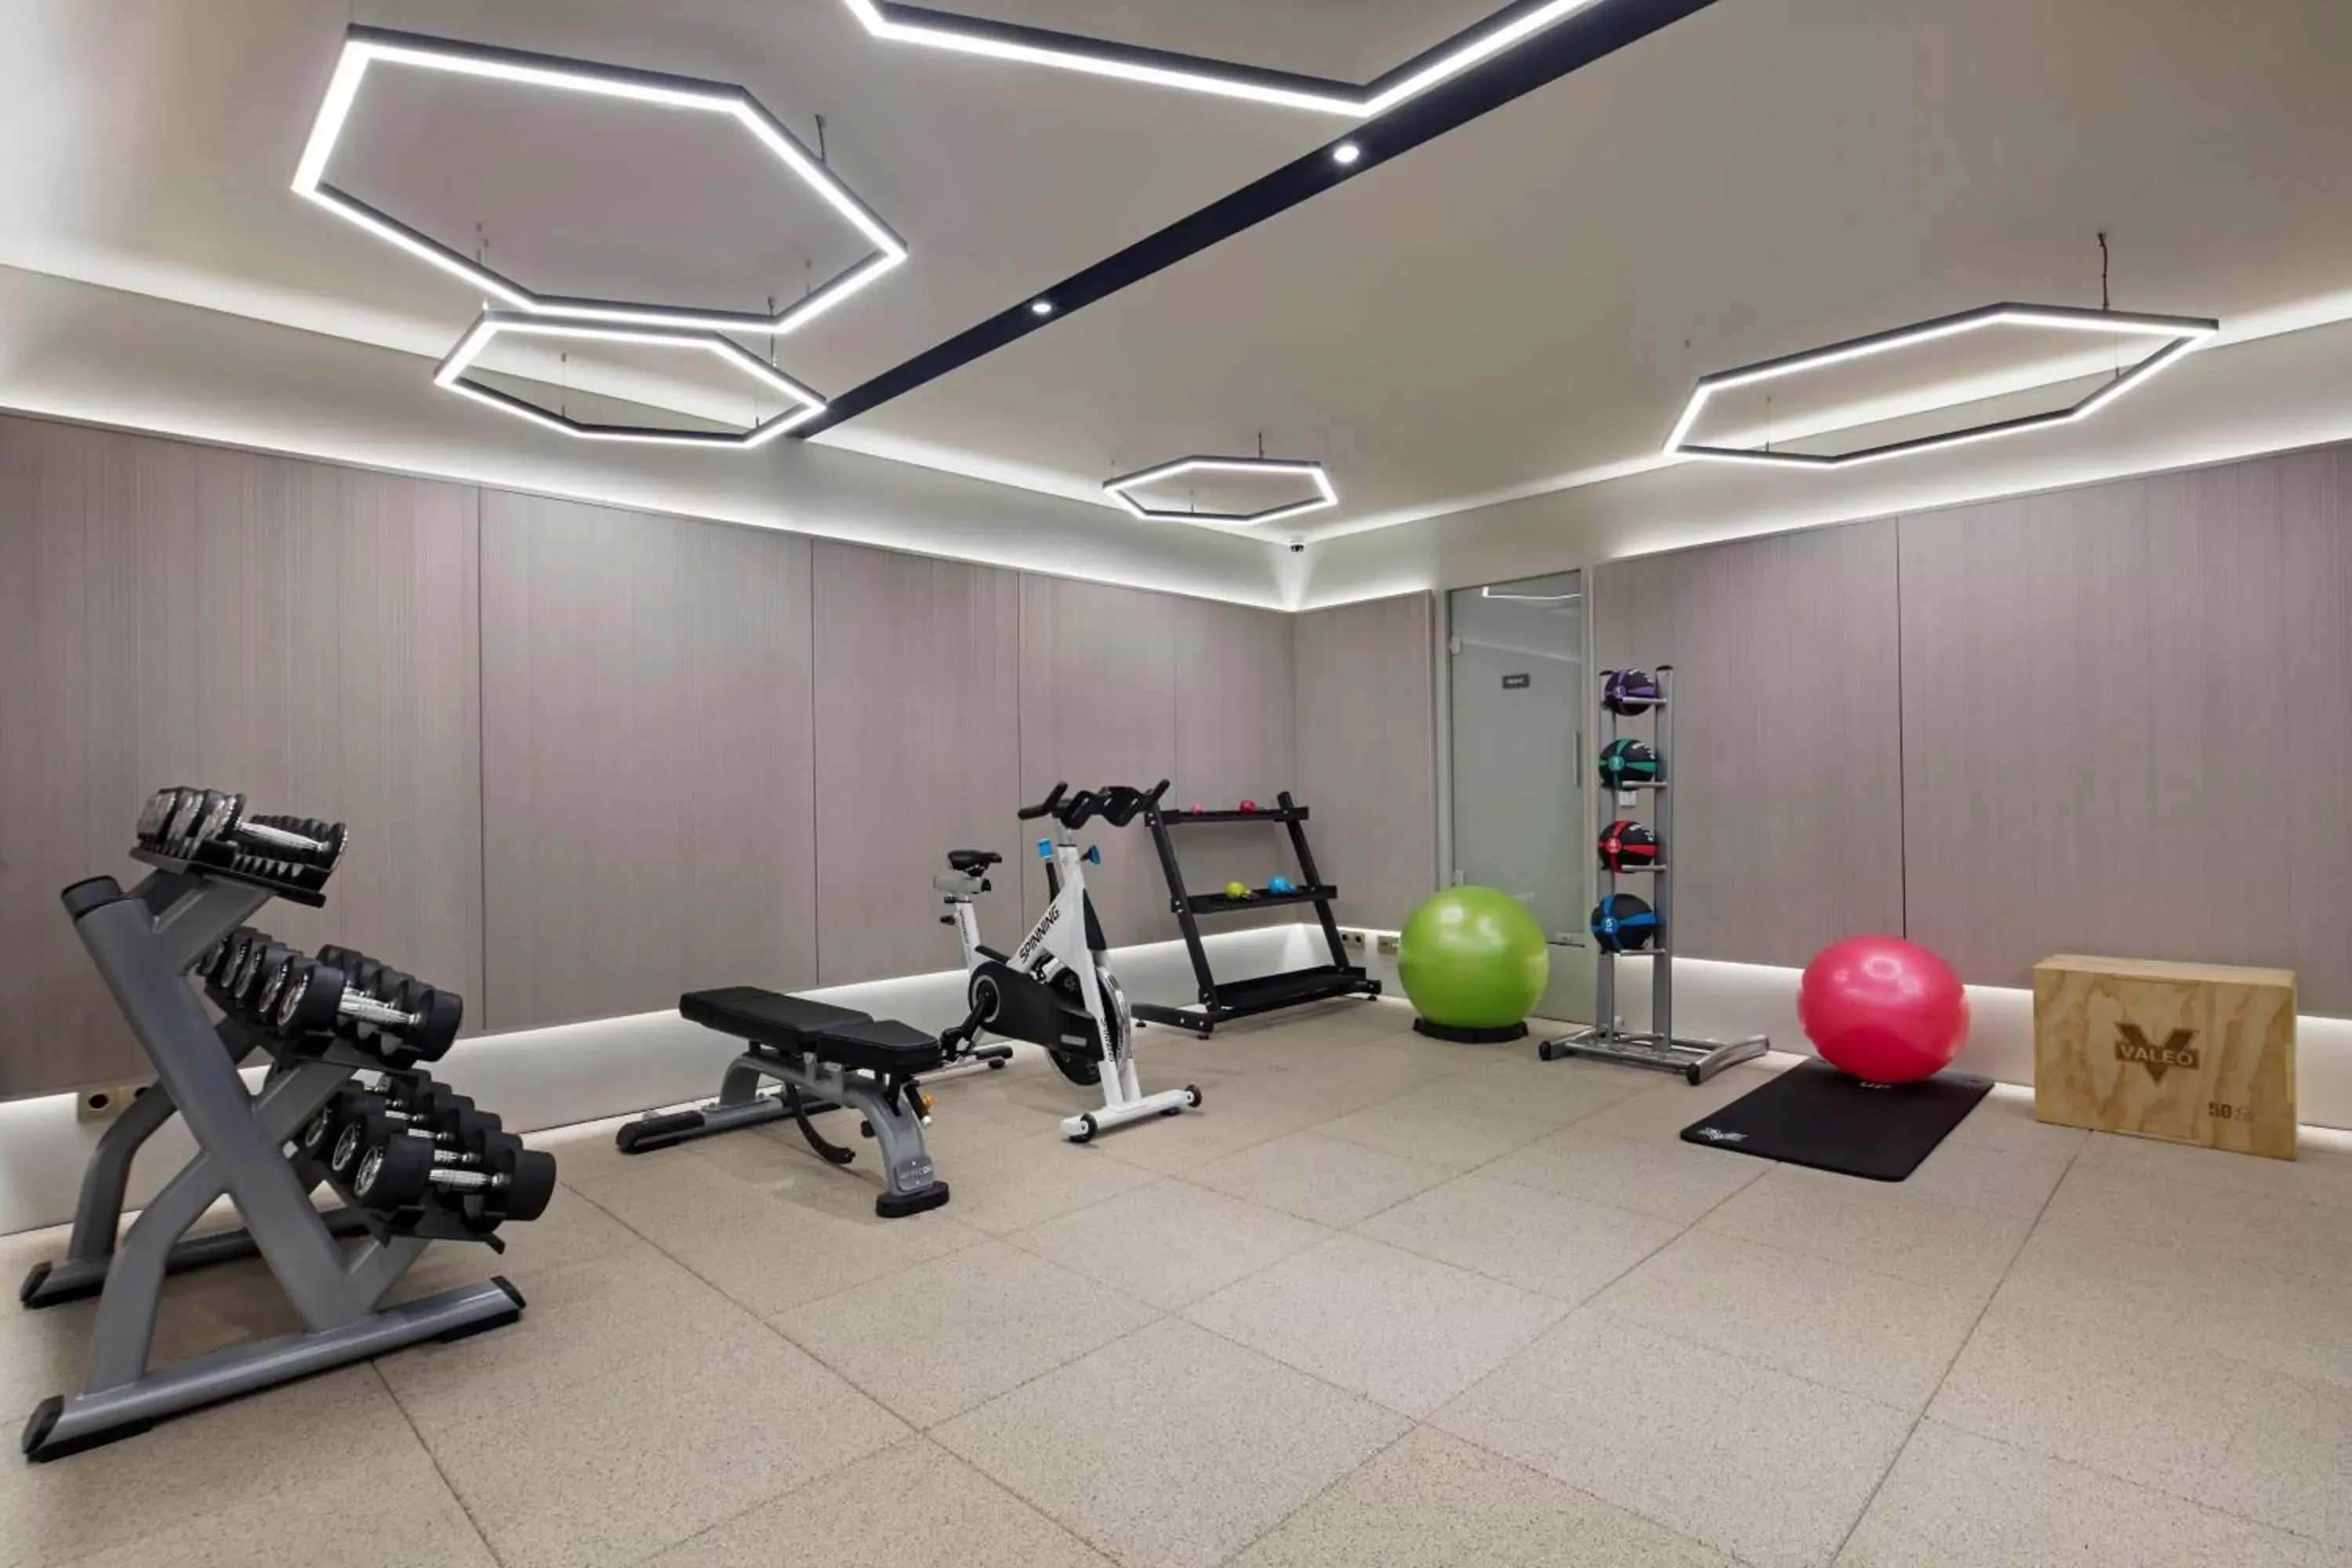 Fitness centre/facilities, Fitness Center/Facilities in Hagia Sofia Mansions Istanbul, Curio Collection by Hilton